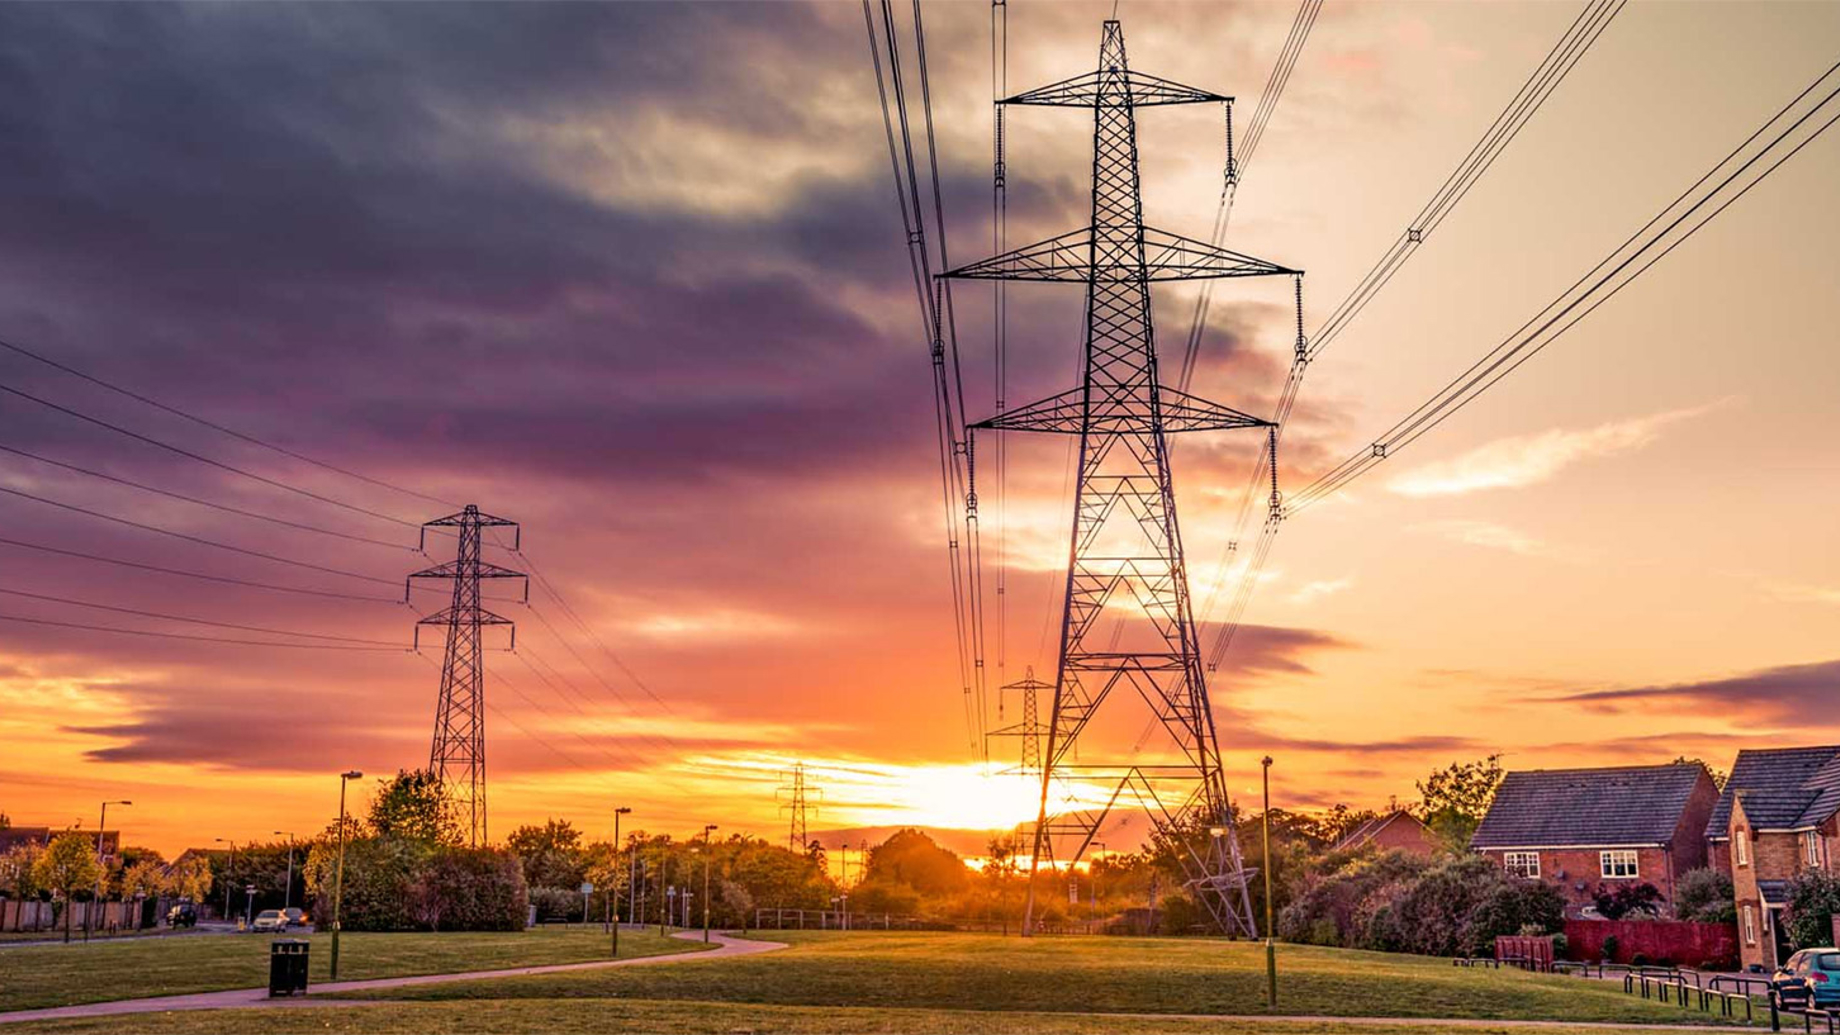 Pylons in the UK at sunset